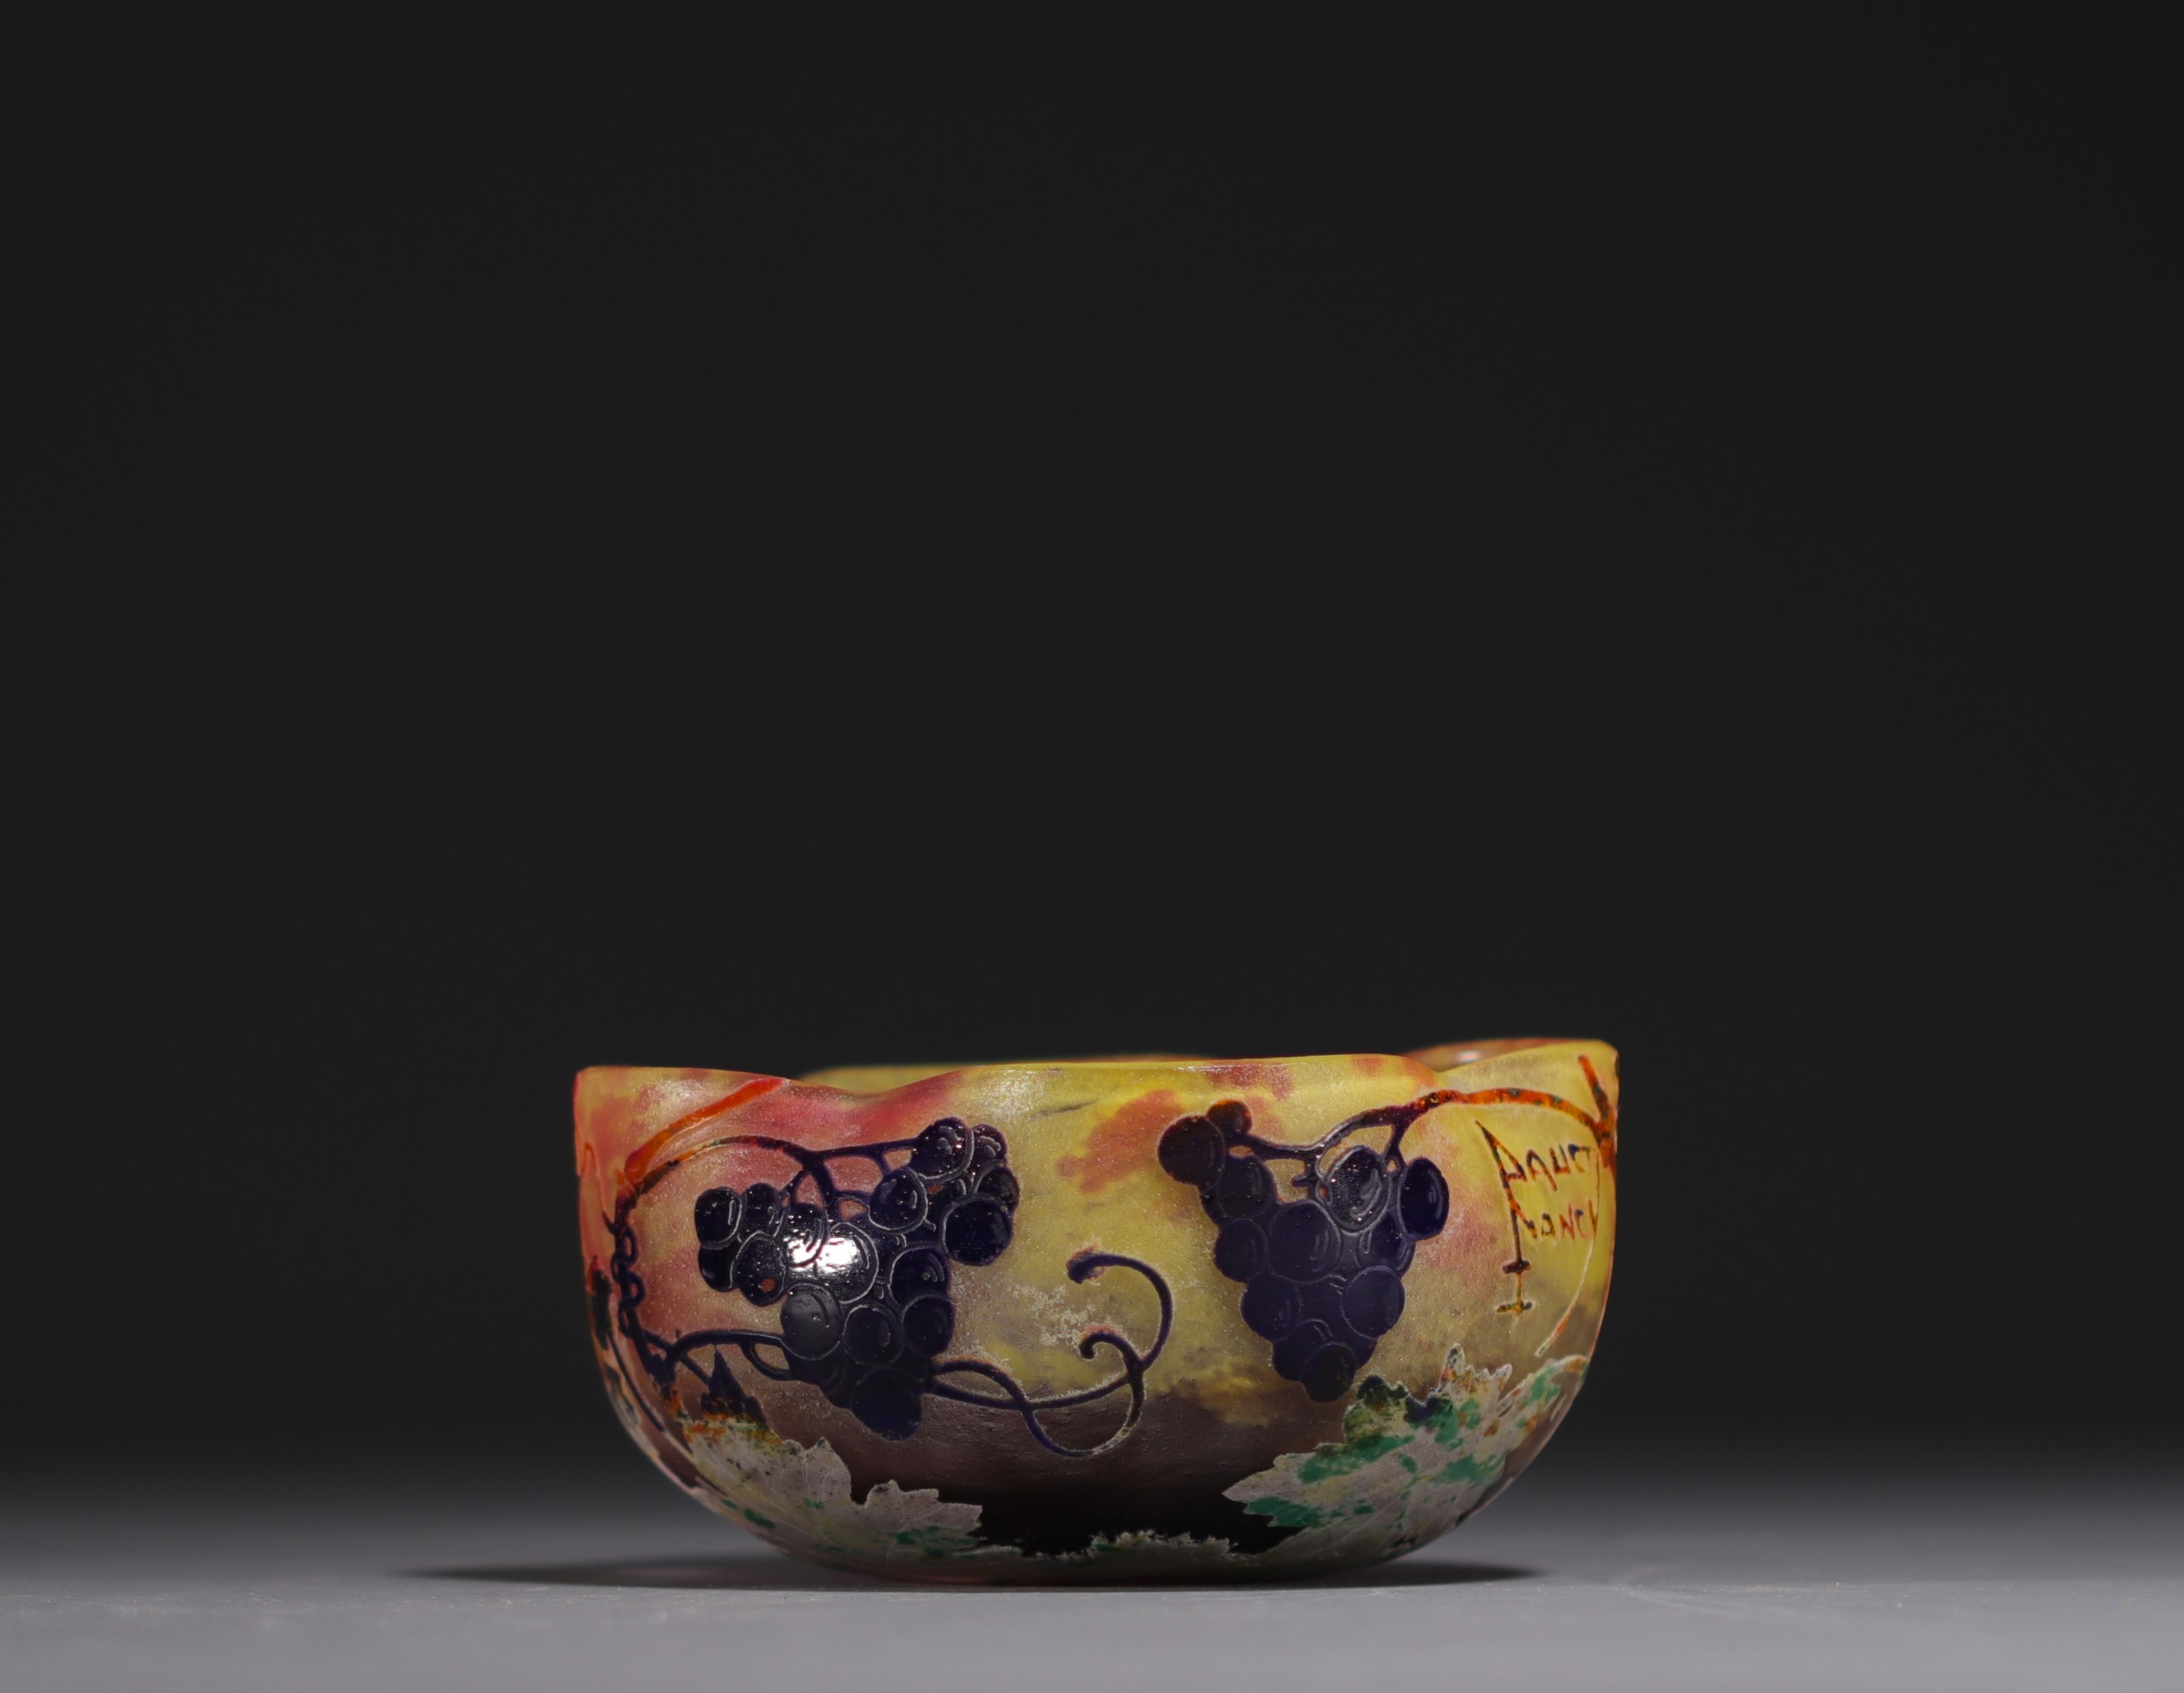 DAUM Nancy - Four-lobed bowl in acid-etched multi-layered glass decorated with bunches of grapes, si - Image 3 of 4